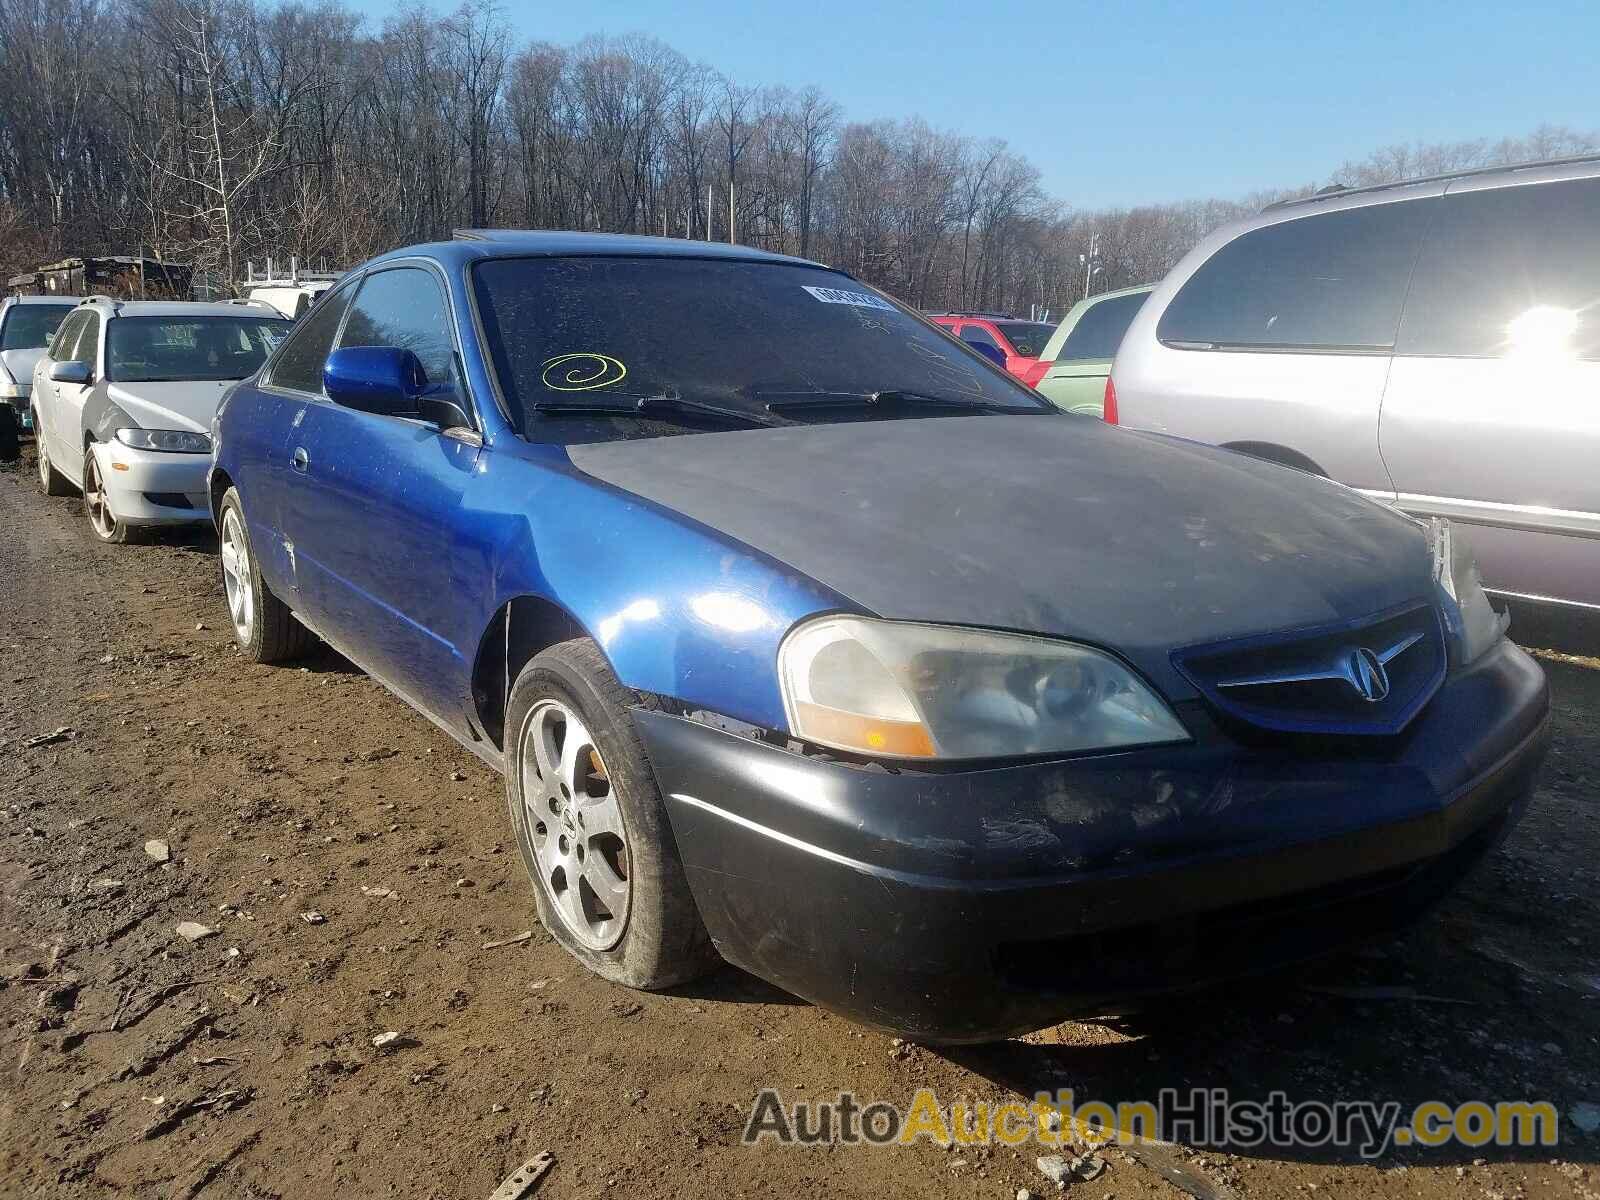 2001 ACURA 3.2CL TYPE TYPE-S, 19UYA42691A038610